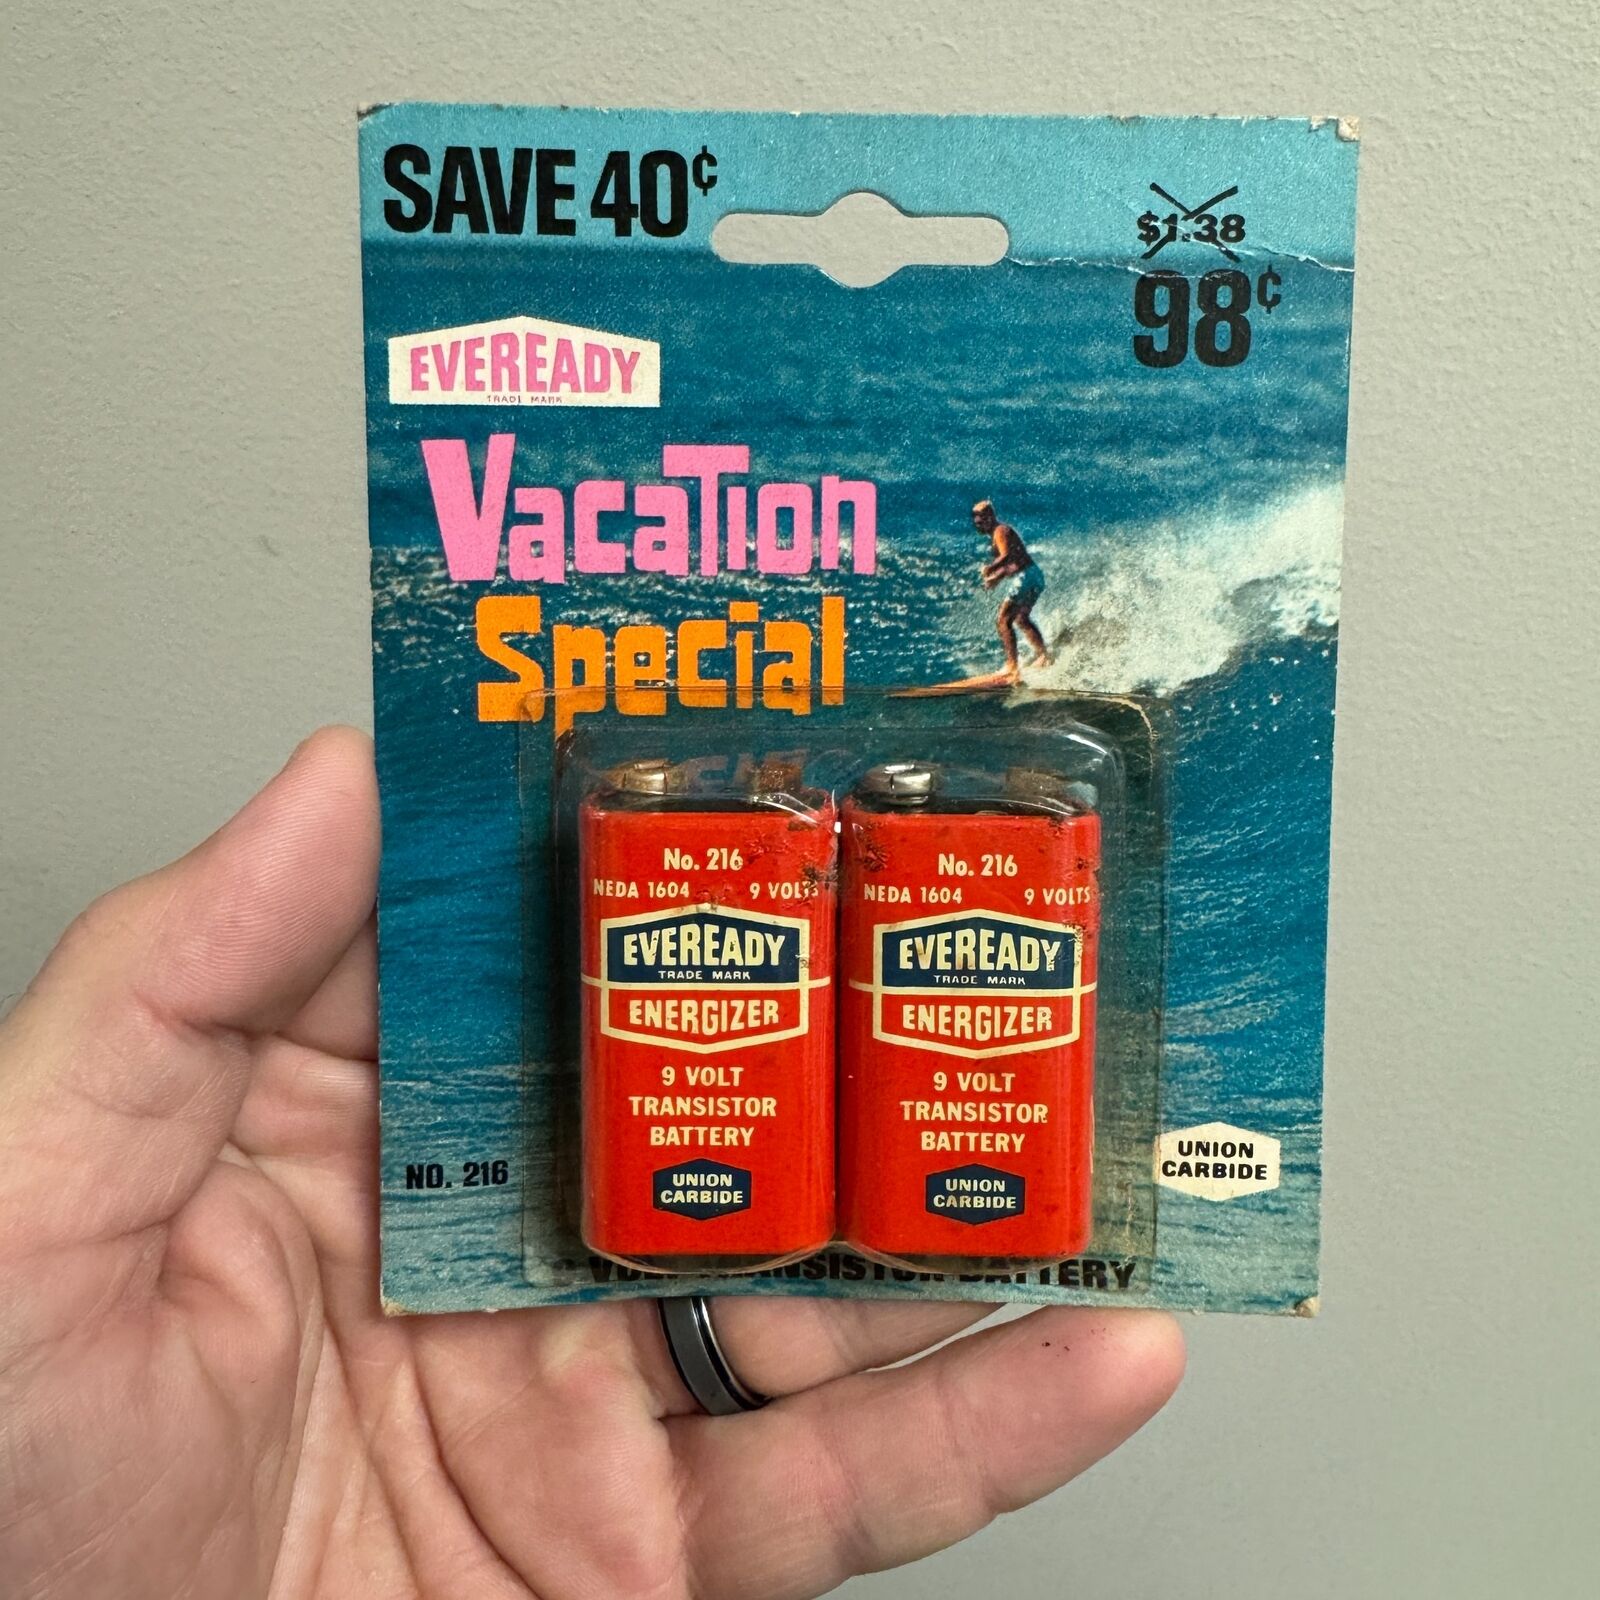 VTG c.1960s Eveready 9 Volt Batteries Vacation Special Packaging w/ Surfer